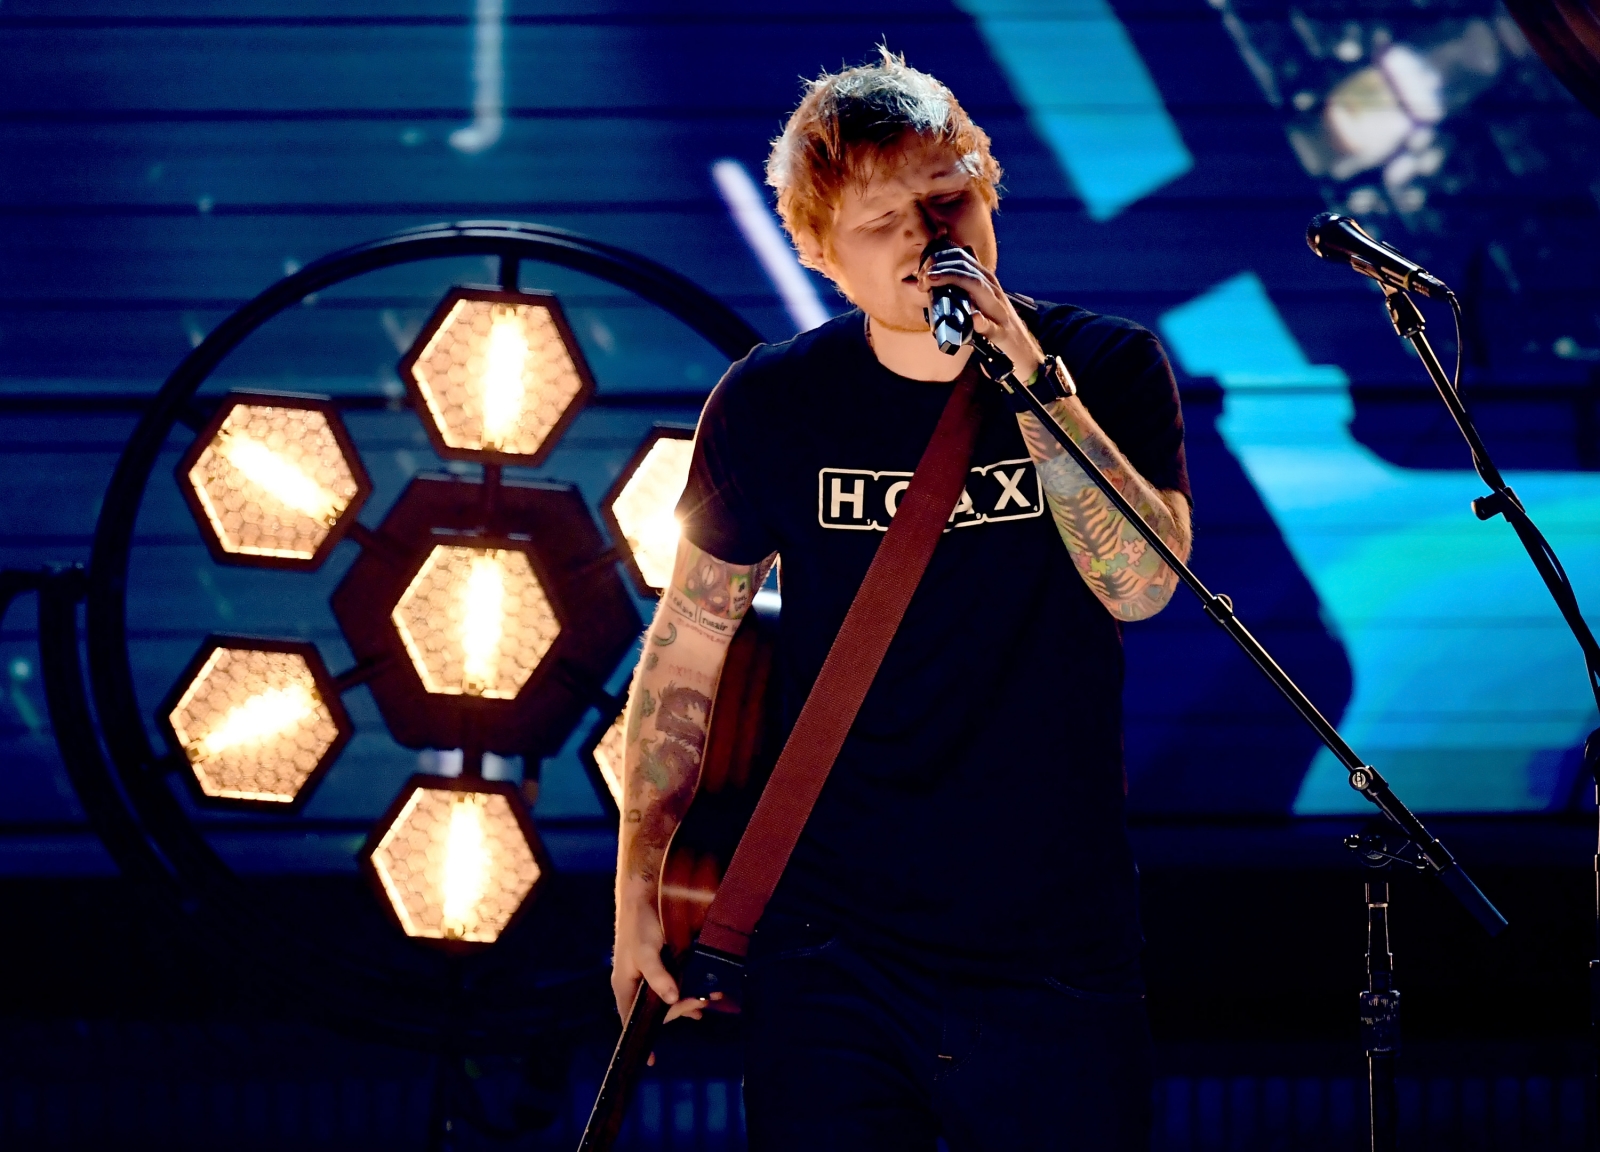 Cancer charity clamps down on Ed Sheeran gig ticket touts